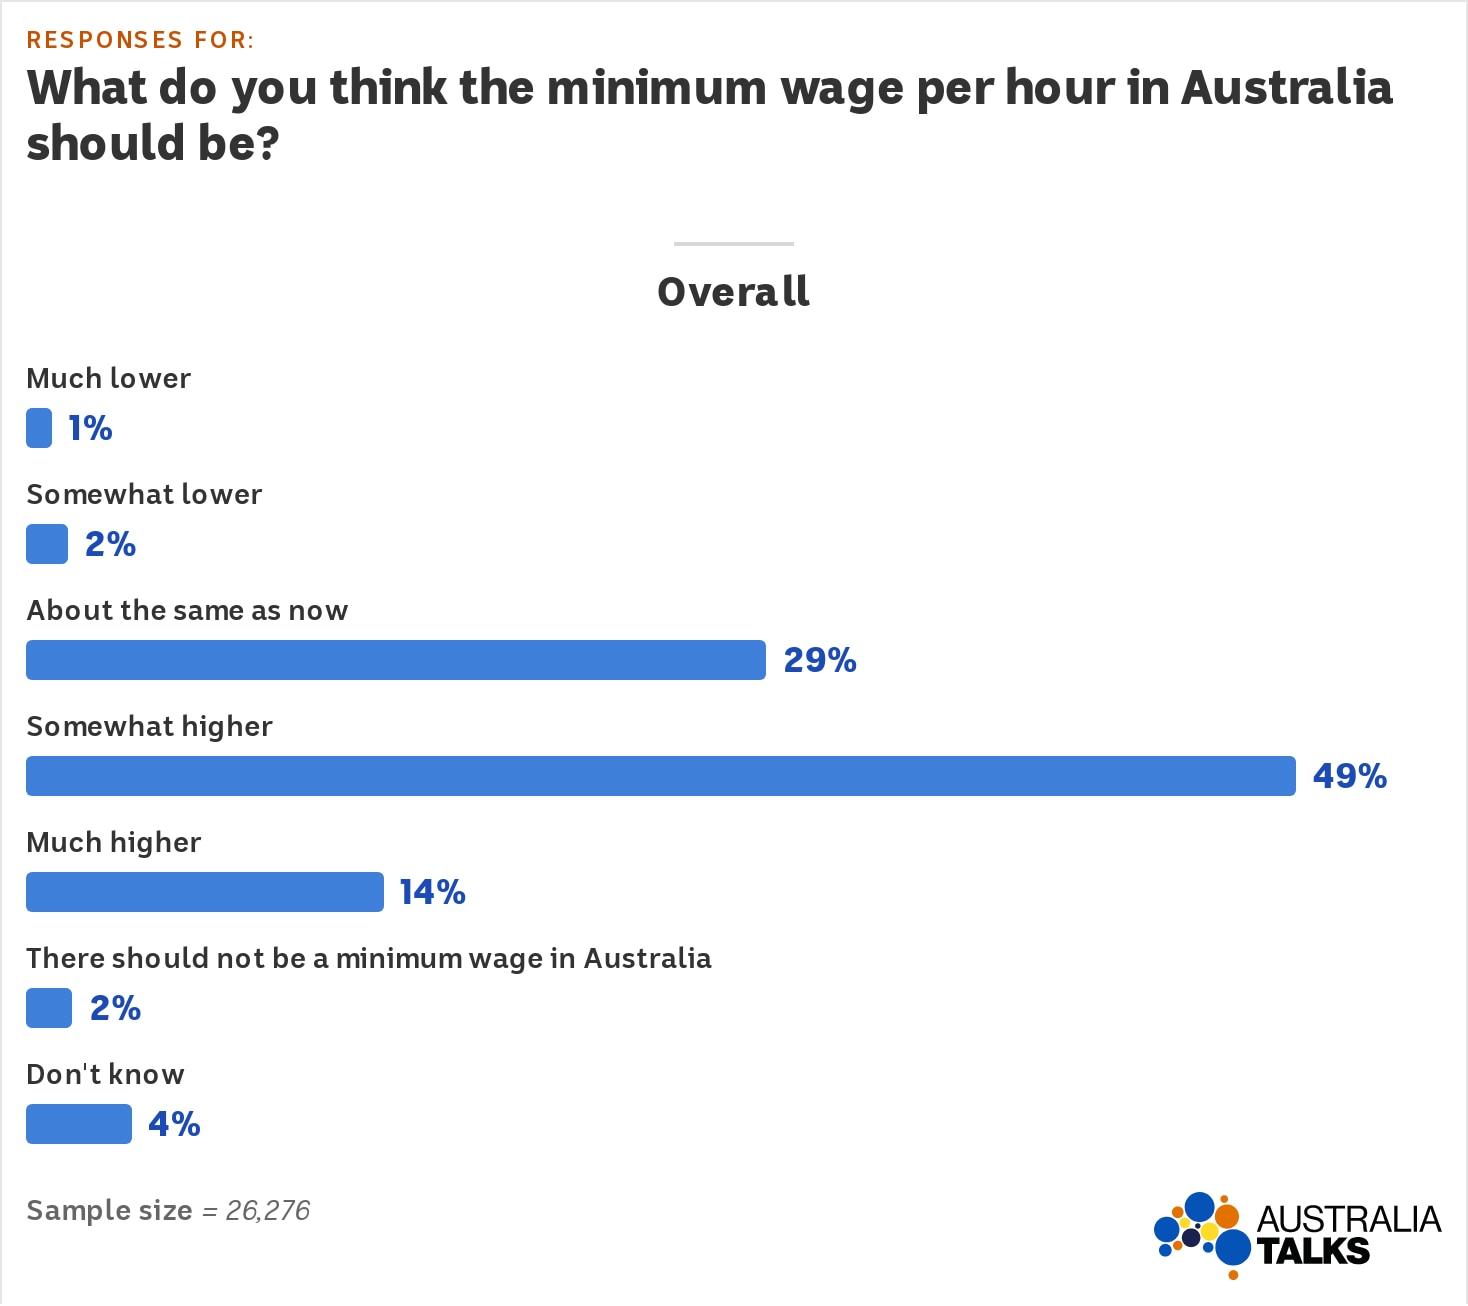 Graph with results for: What do you think the minimum wage per hour in Australia should be?